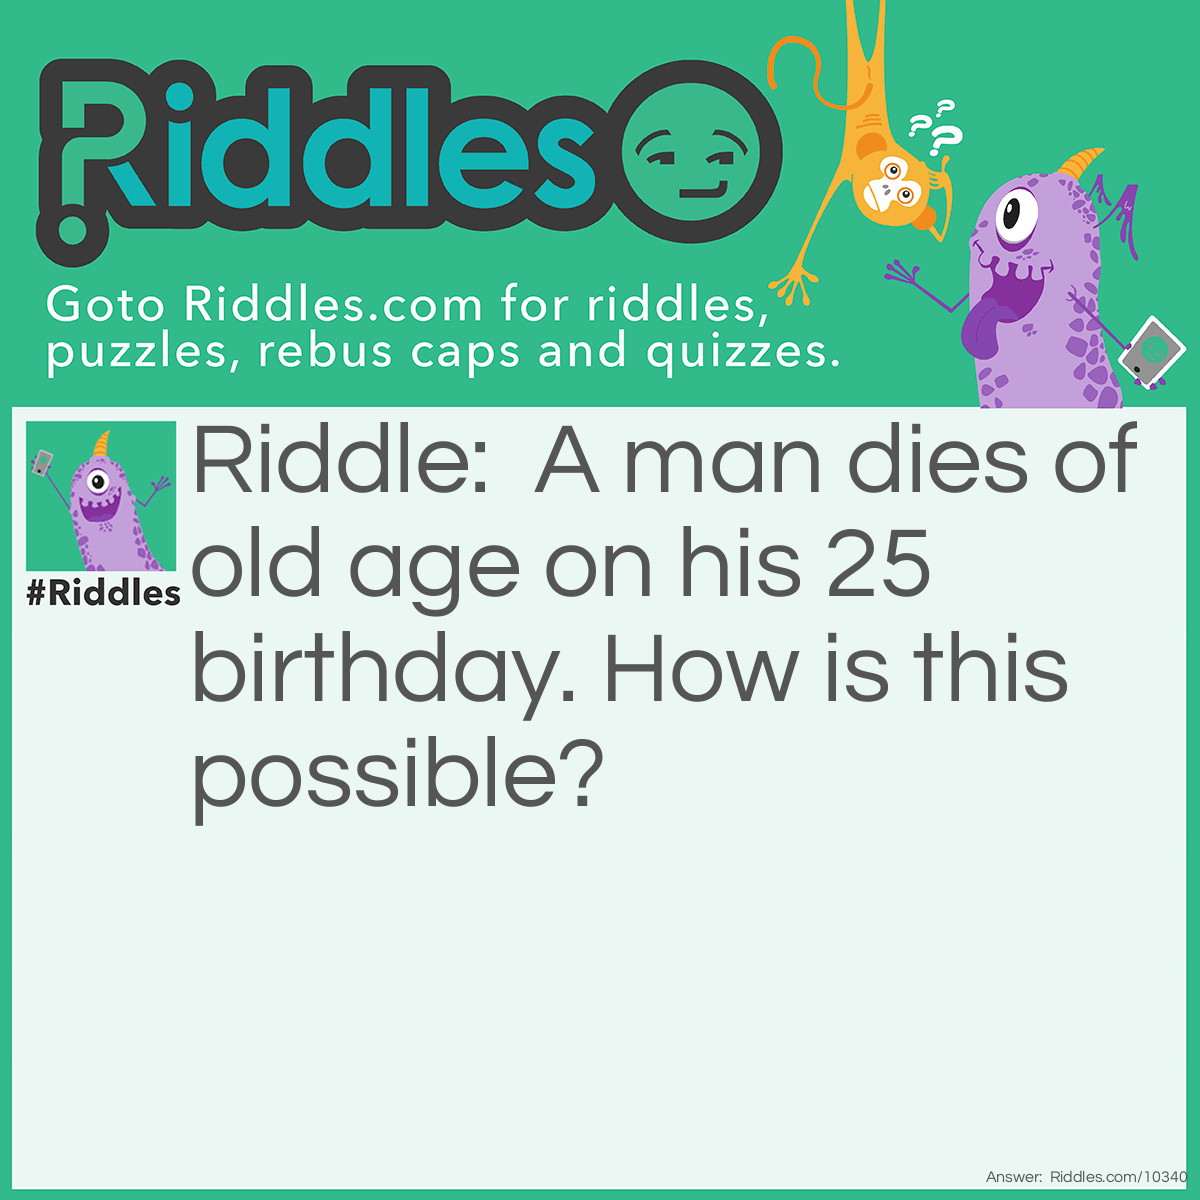 Riddle: A man dies of old age on his 25 birthday. How is this possible? Answer: He was born on February 29